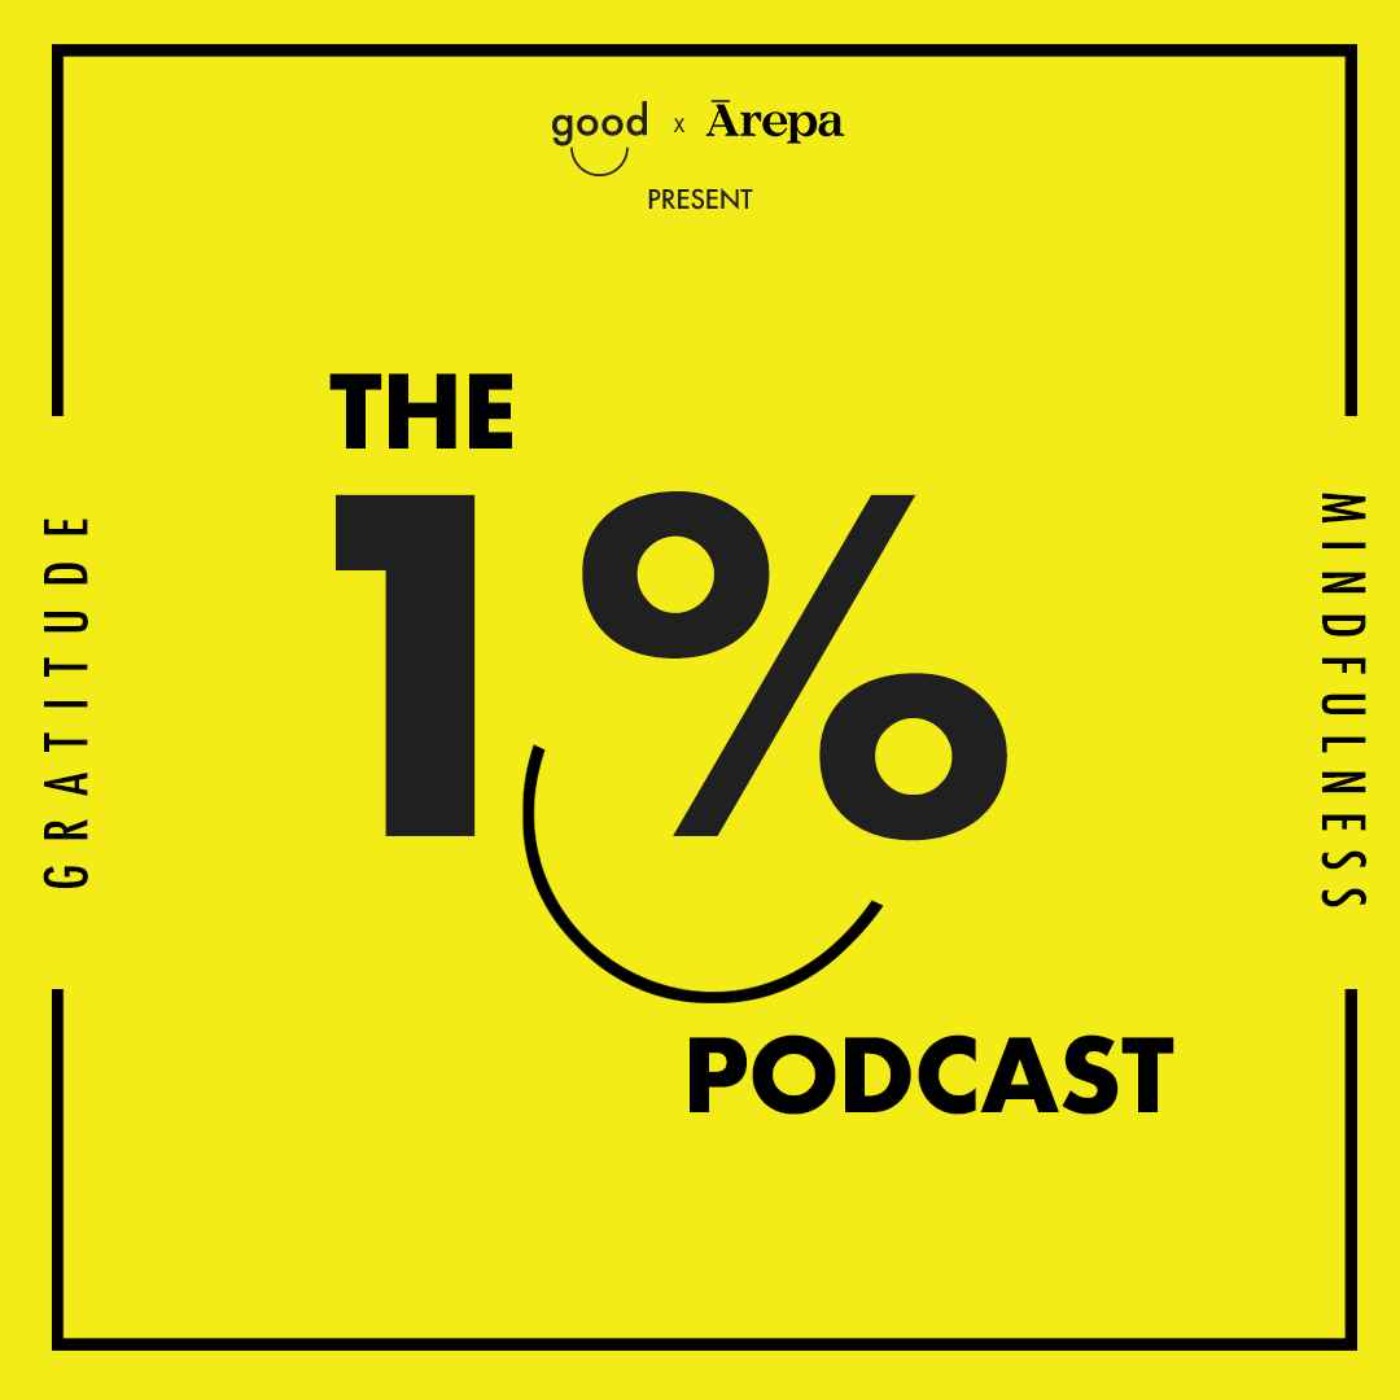 1% Pod - The most important qualities in a partner are...